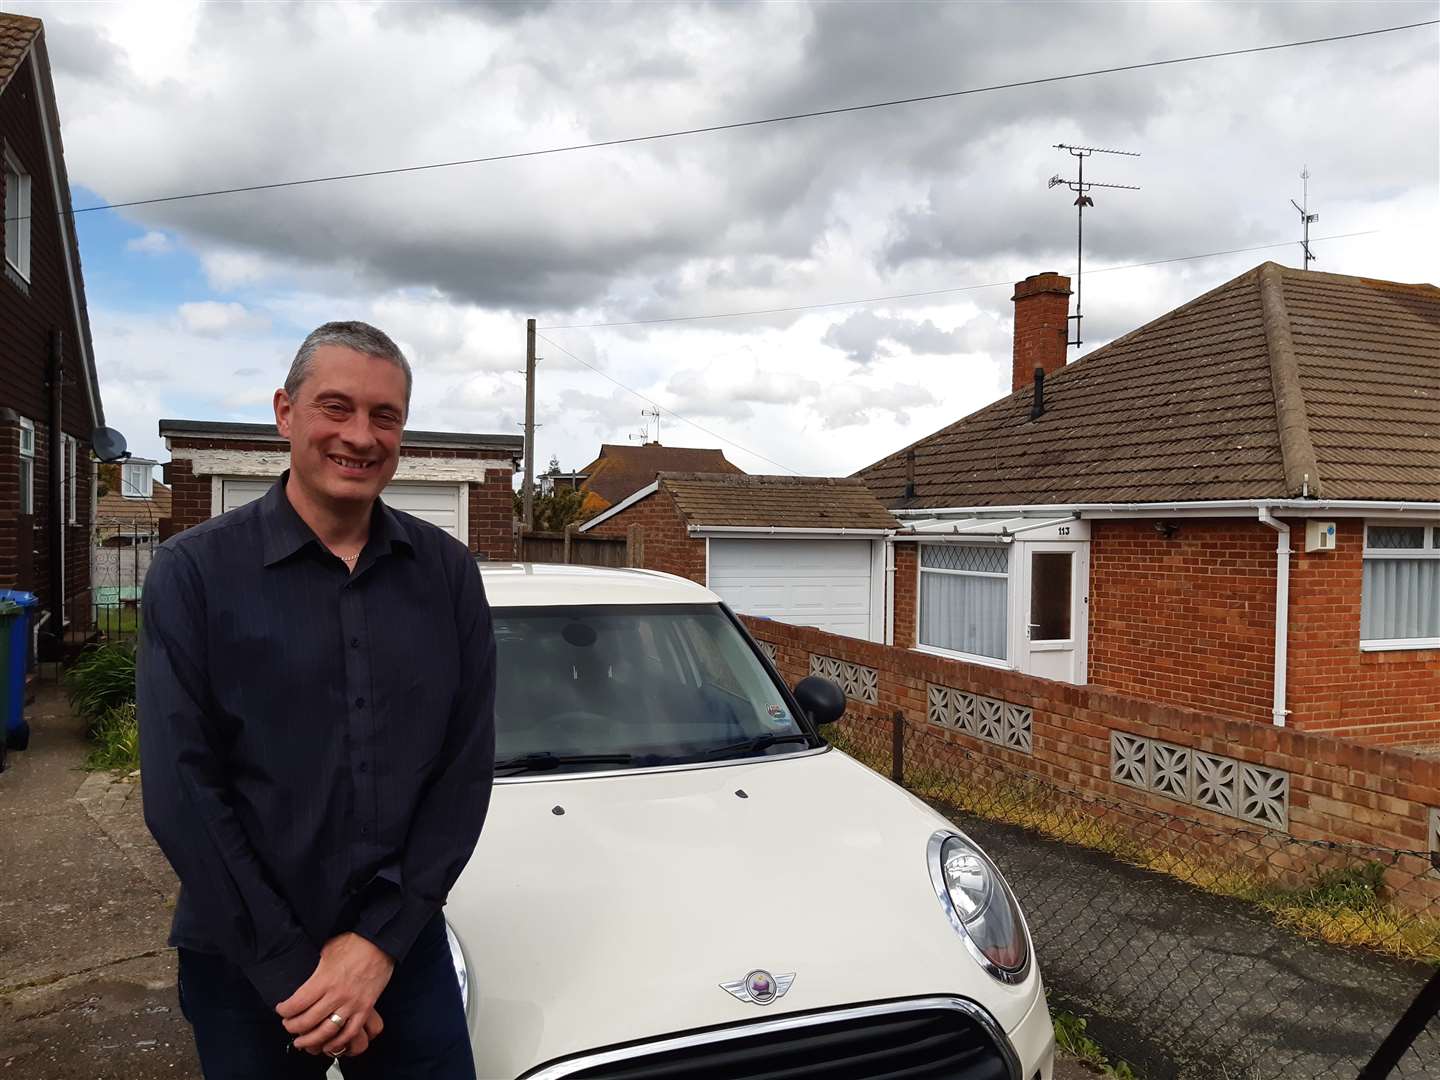 Steven Earl, a driving instructor from Sittingbourne, was our tour for some of the county's most dangerous rural roads